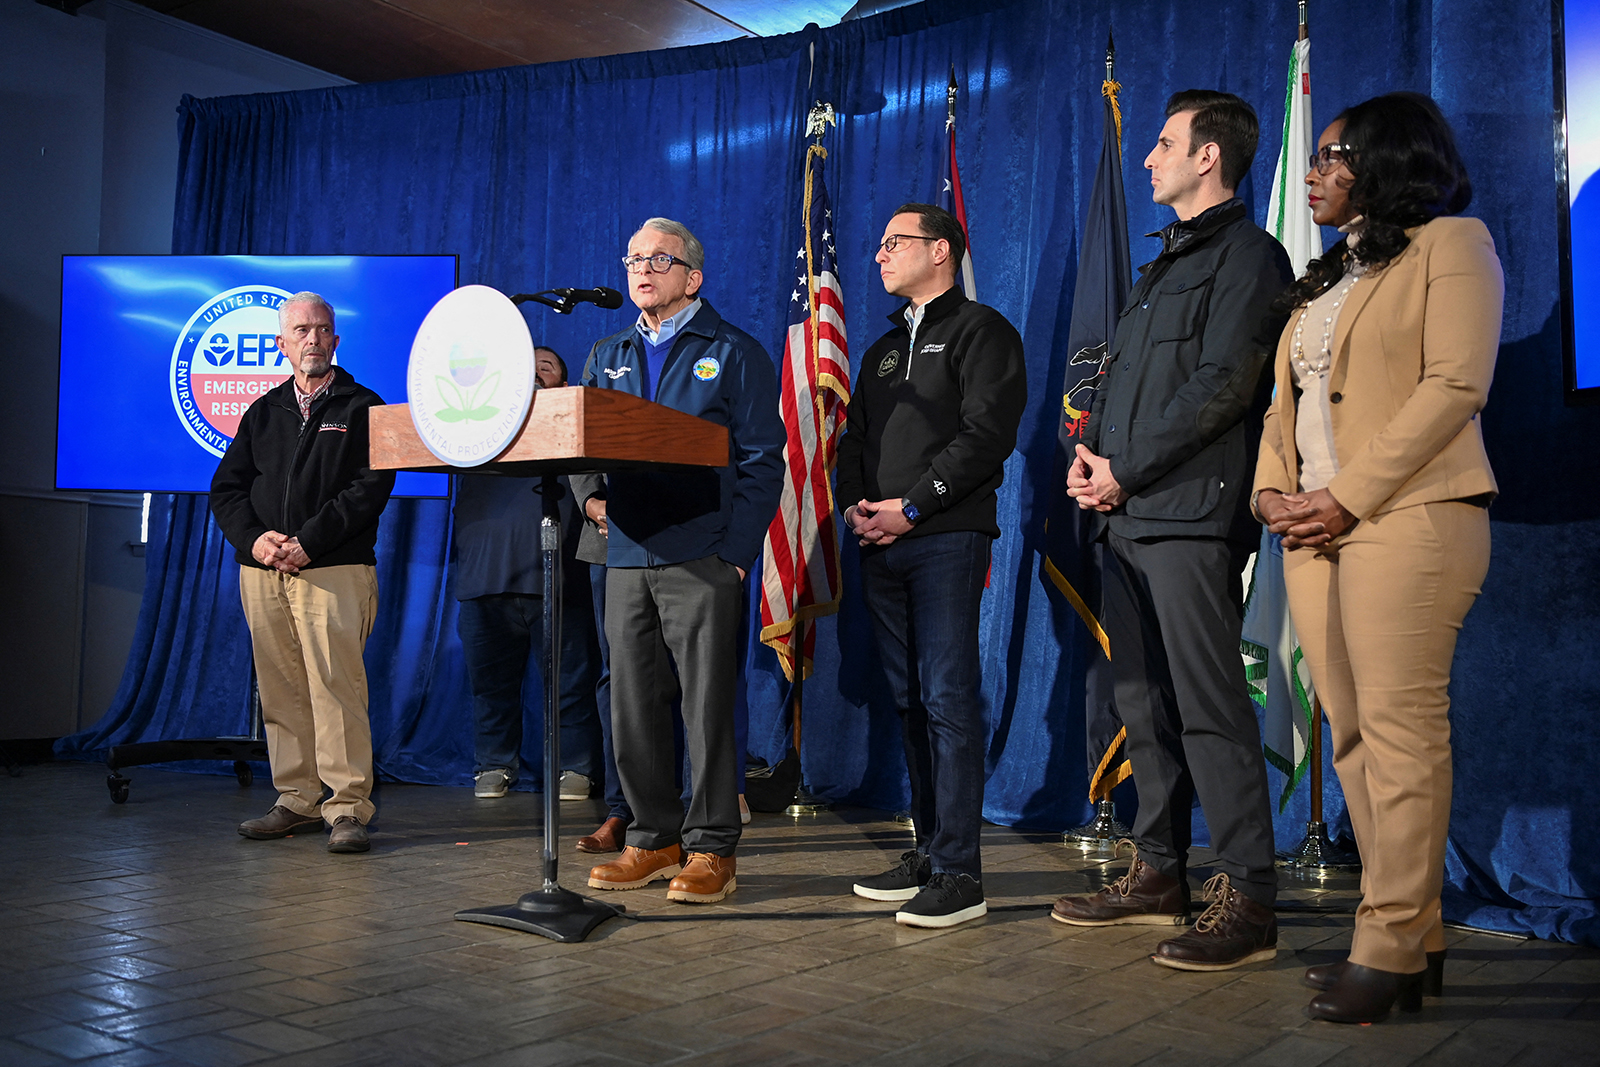 Ohio Governor Mike DeWine, flanked by other local, state and national leaders, addresses the press on February 21.